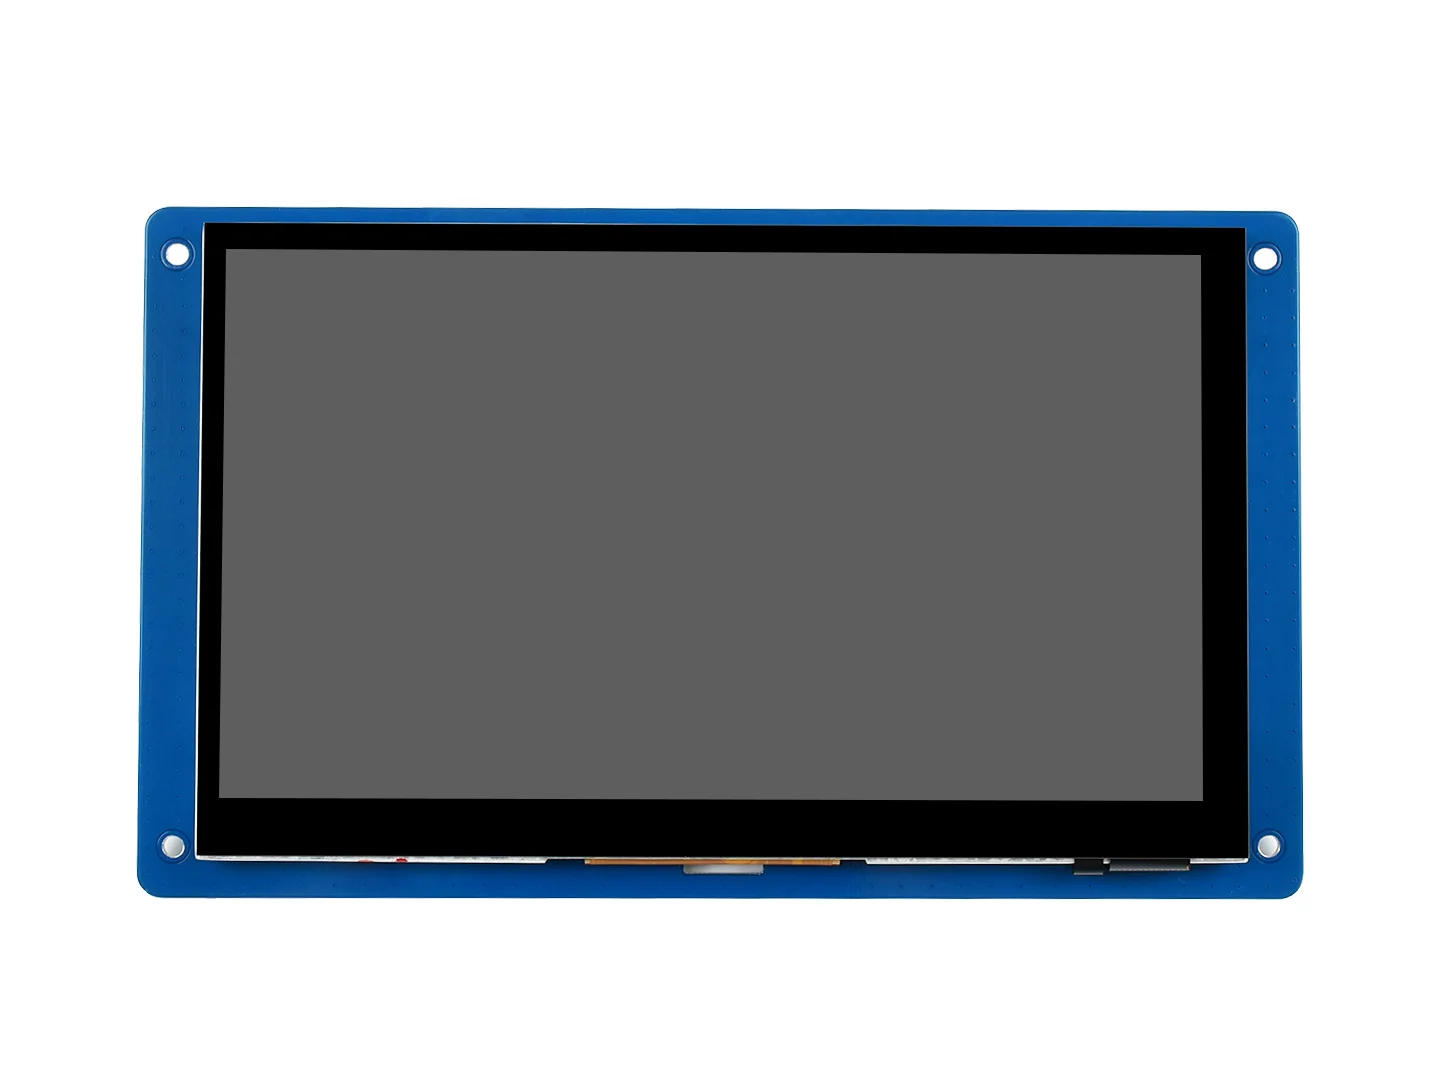 7inch Capacitive Touch LCD (G) 800 × 480,Multicolor Graphic LCD (Type G), With Capacitive Touch Screen And Stand-Alone Touch Con